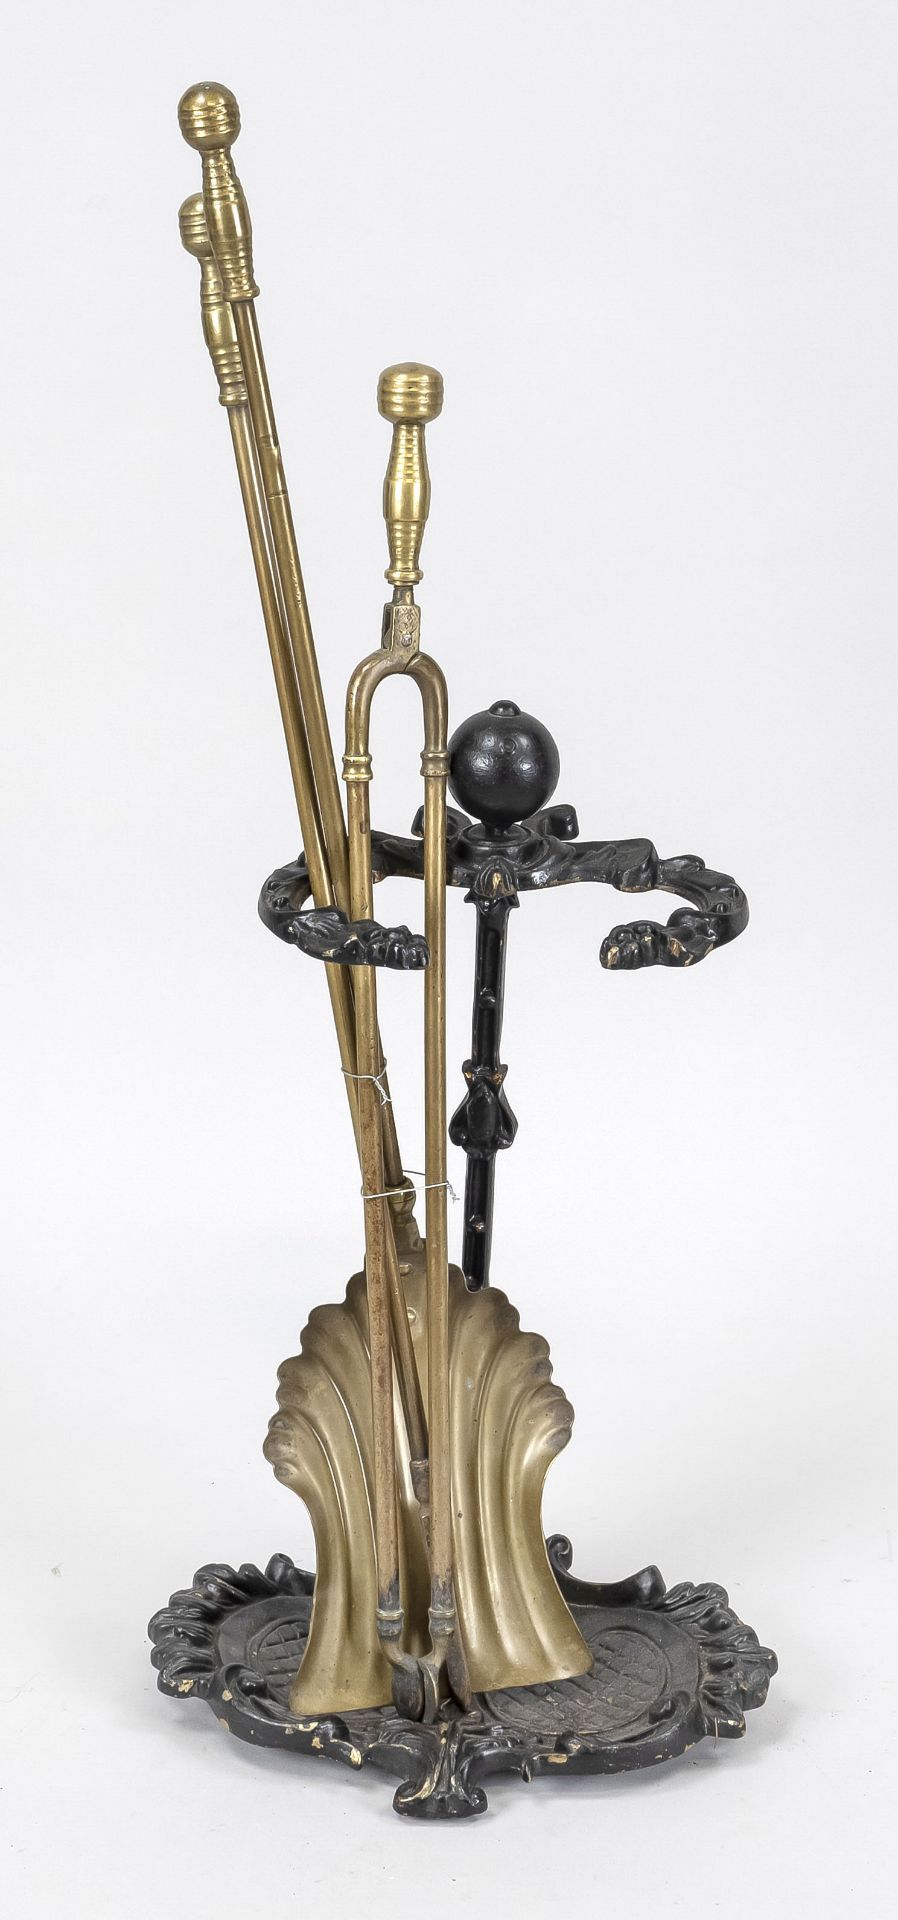 Fireplace set with stand, 20th c., brass/bronze. Ornamented stand, black lacquered. Set consists